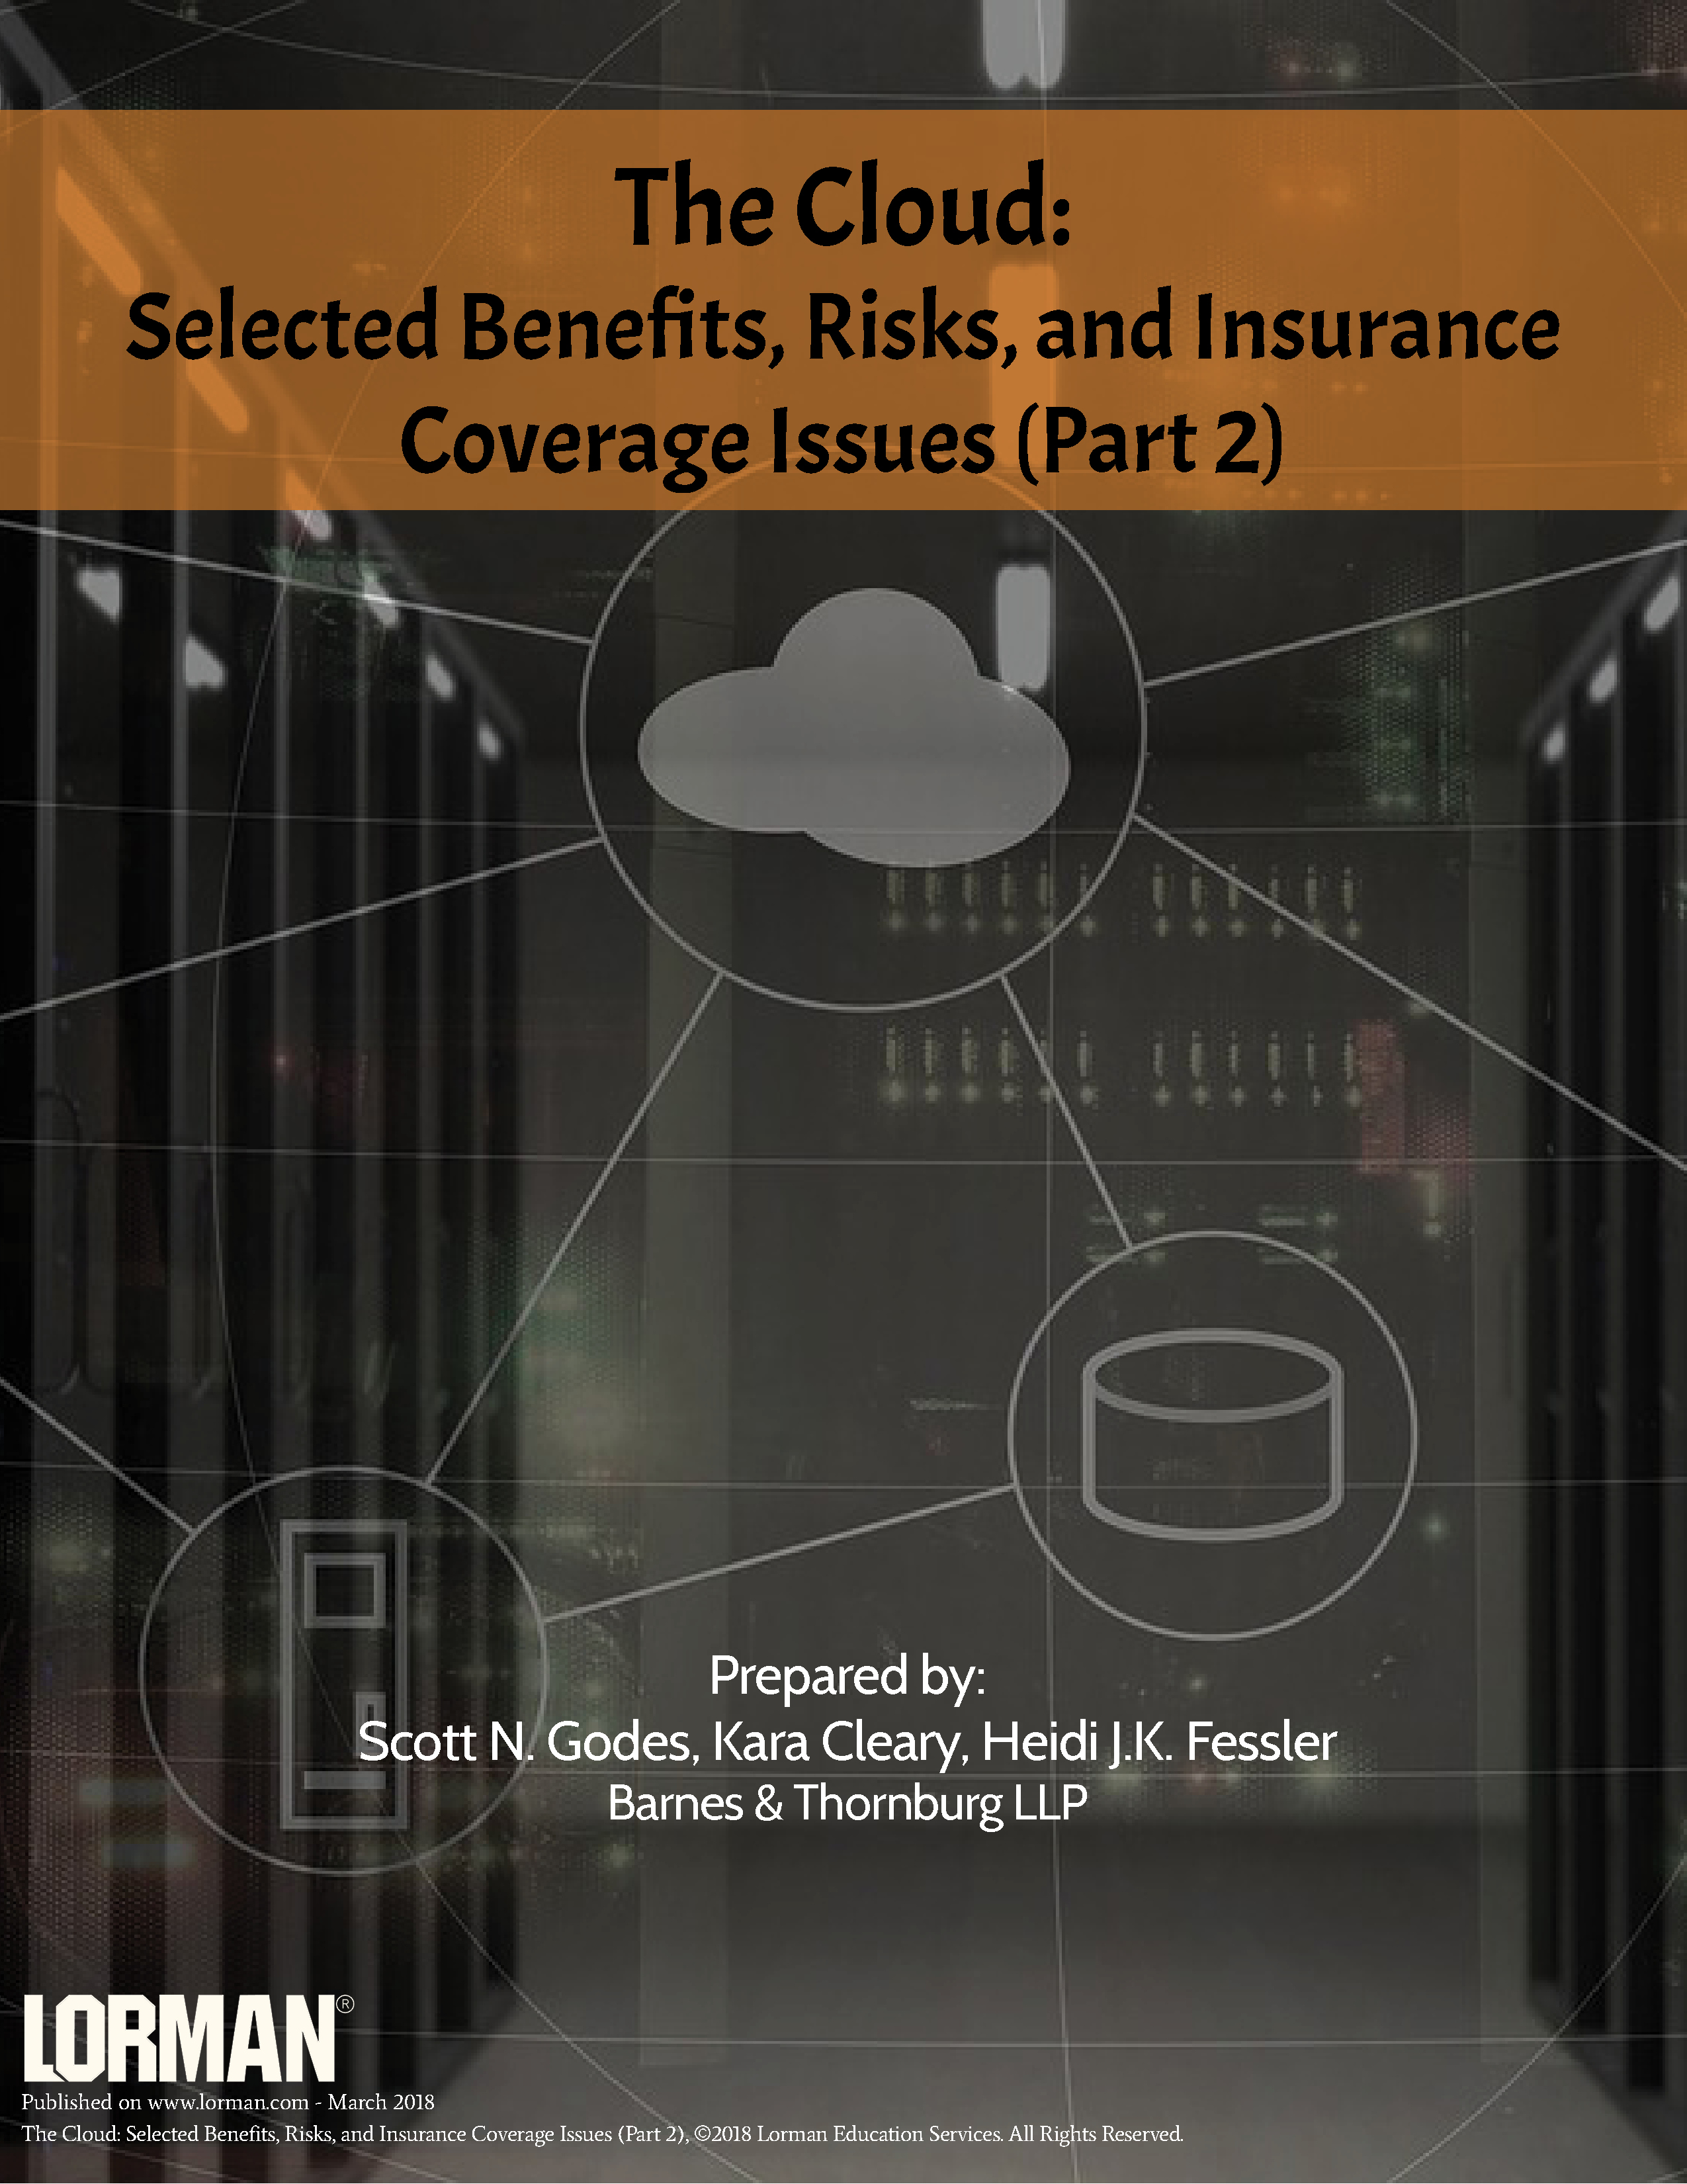 The Cloud: Selected Benefits, Risks, and Insurance Coverage Issues (Part 2)